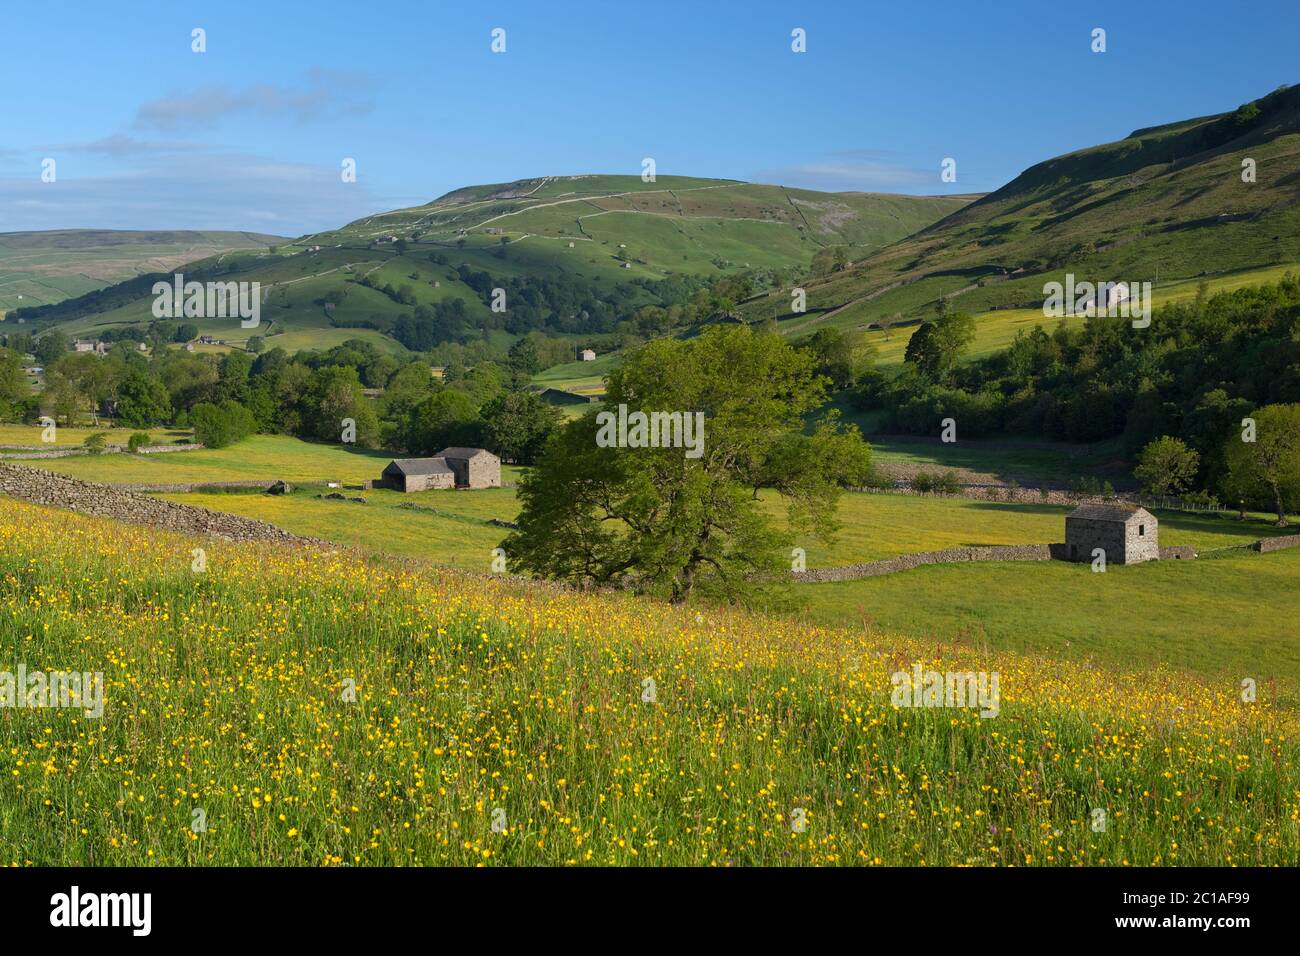 View of the Swaledale valley with Buttercup filled meadow, Muker, Yorkshire Dales National Park, North Yorkshire, England, United Kingdom, Europe Stock Photo